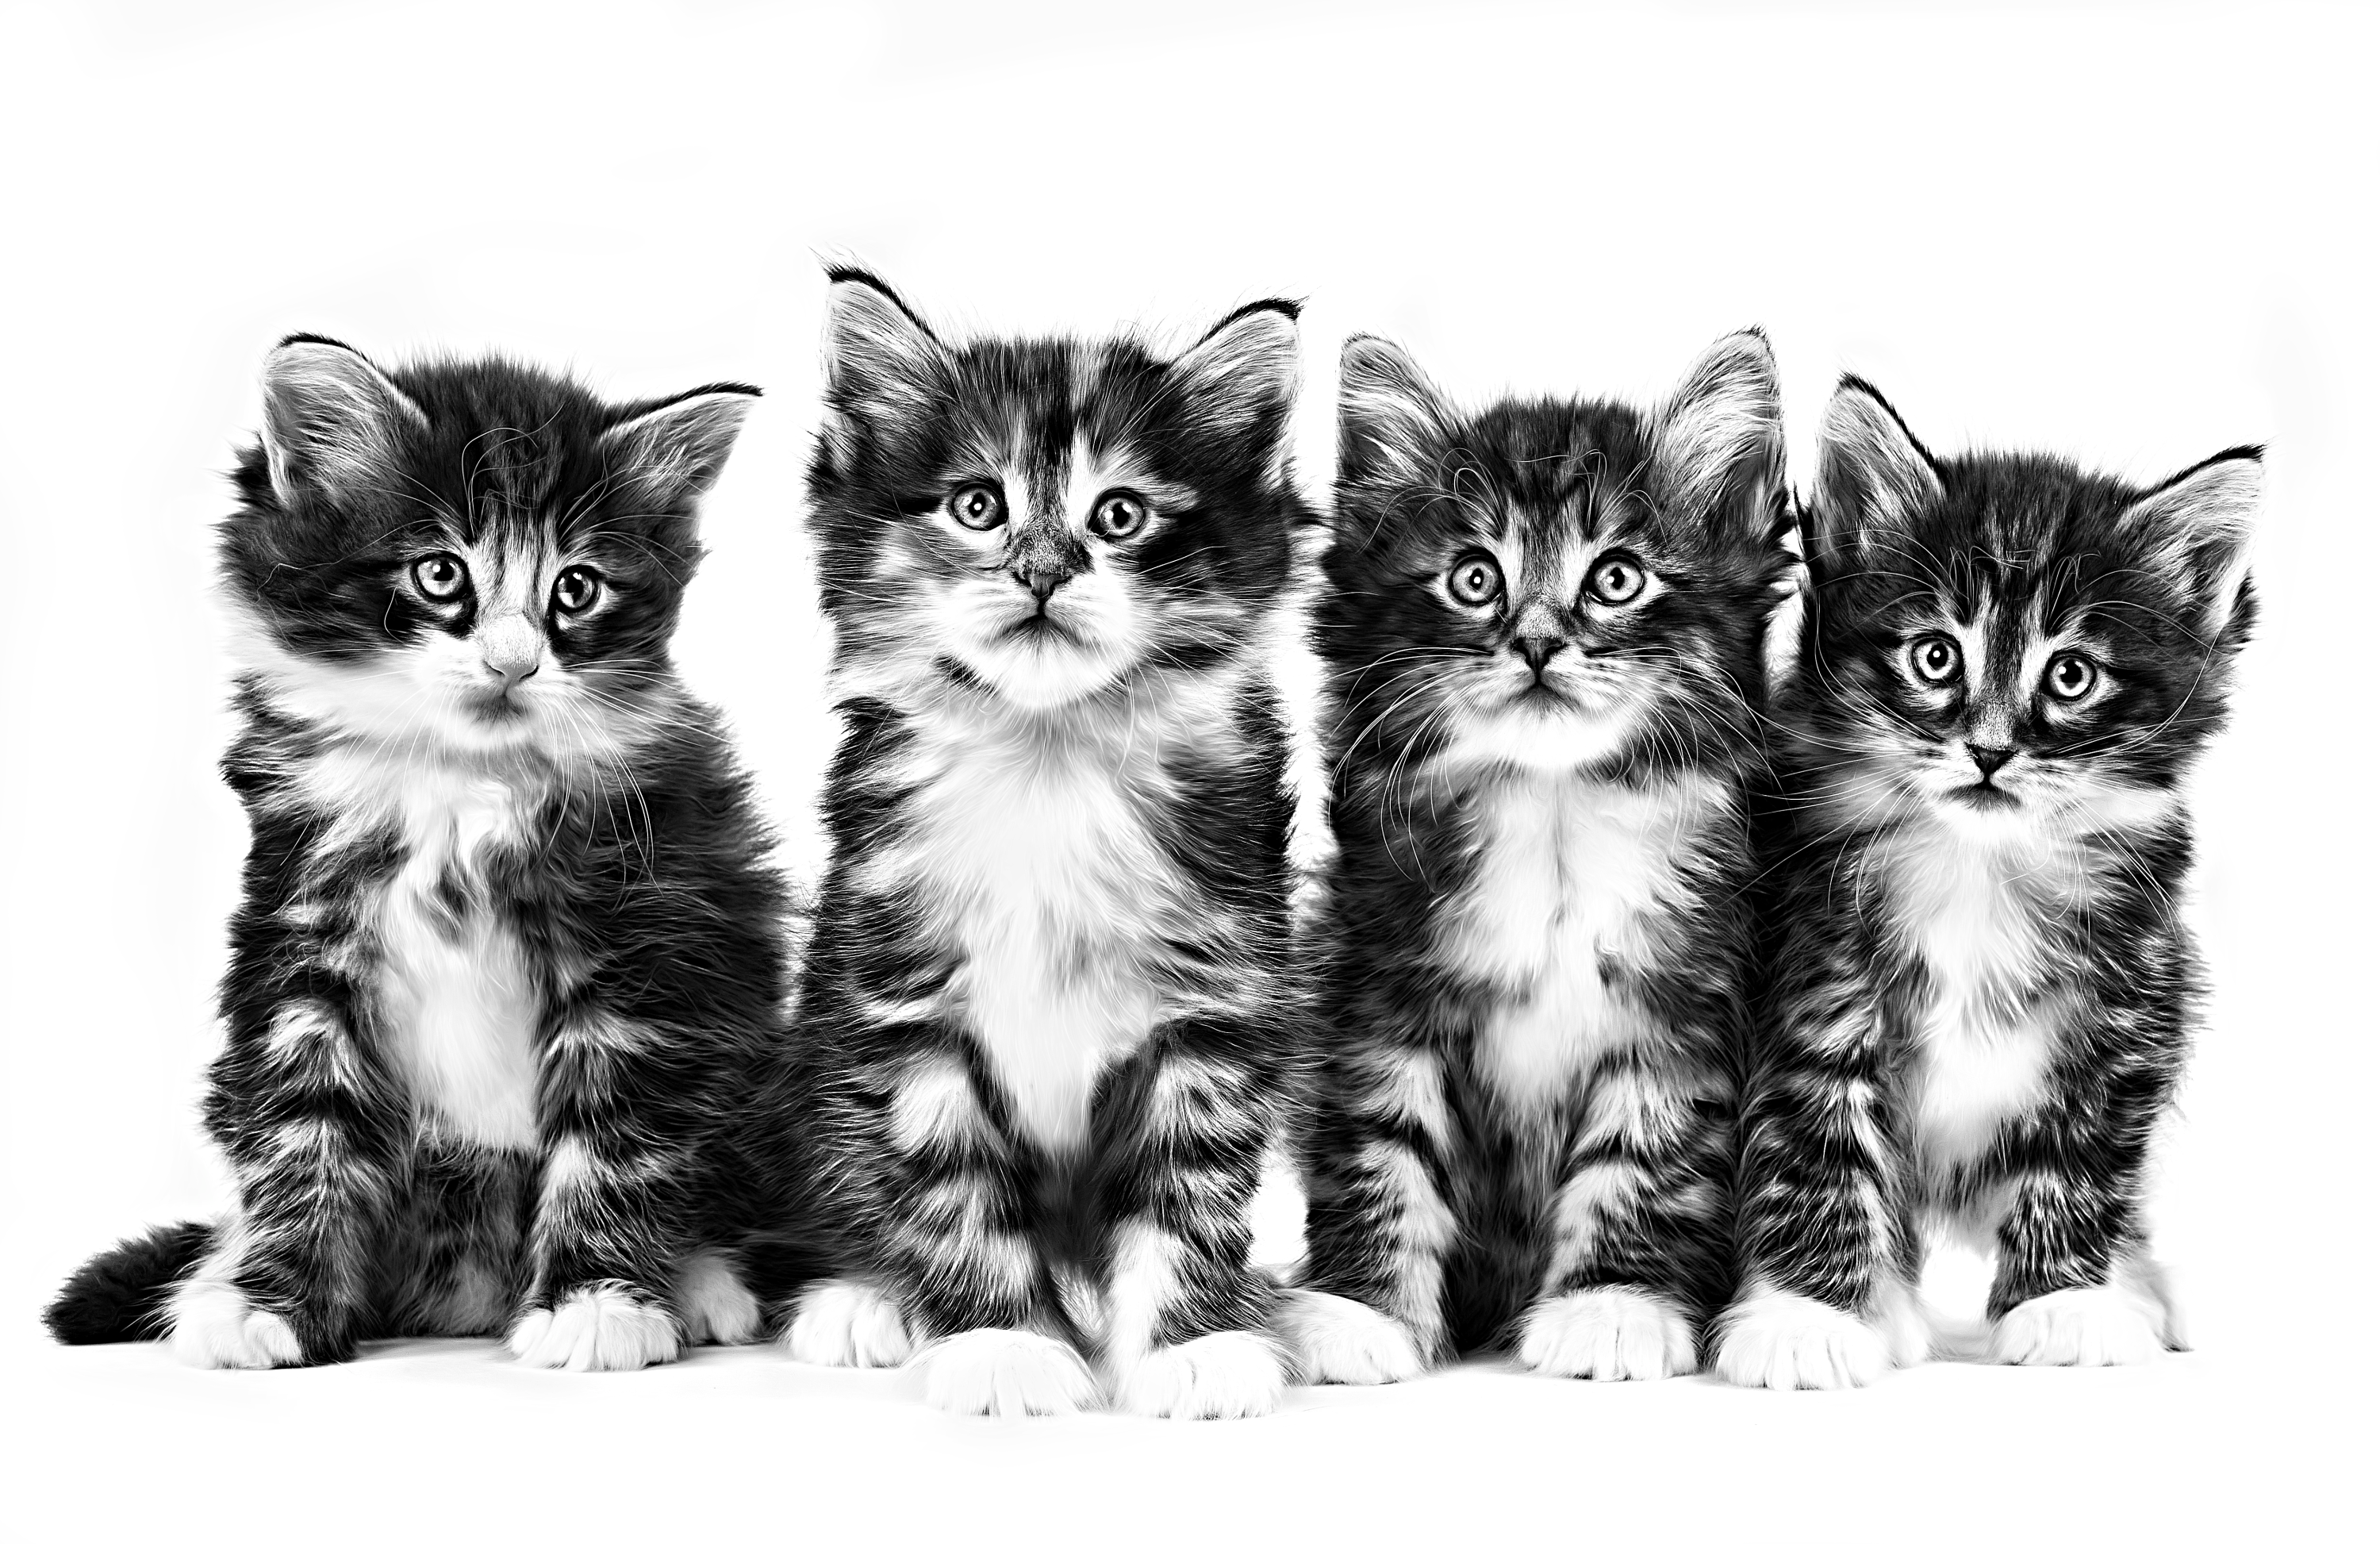 Norwegian Forest Cat kittens sat together in black and white